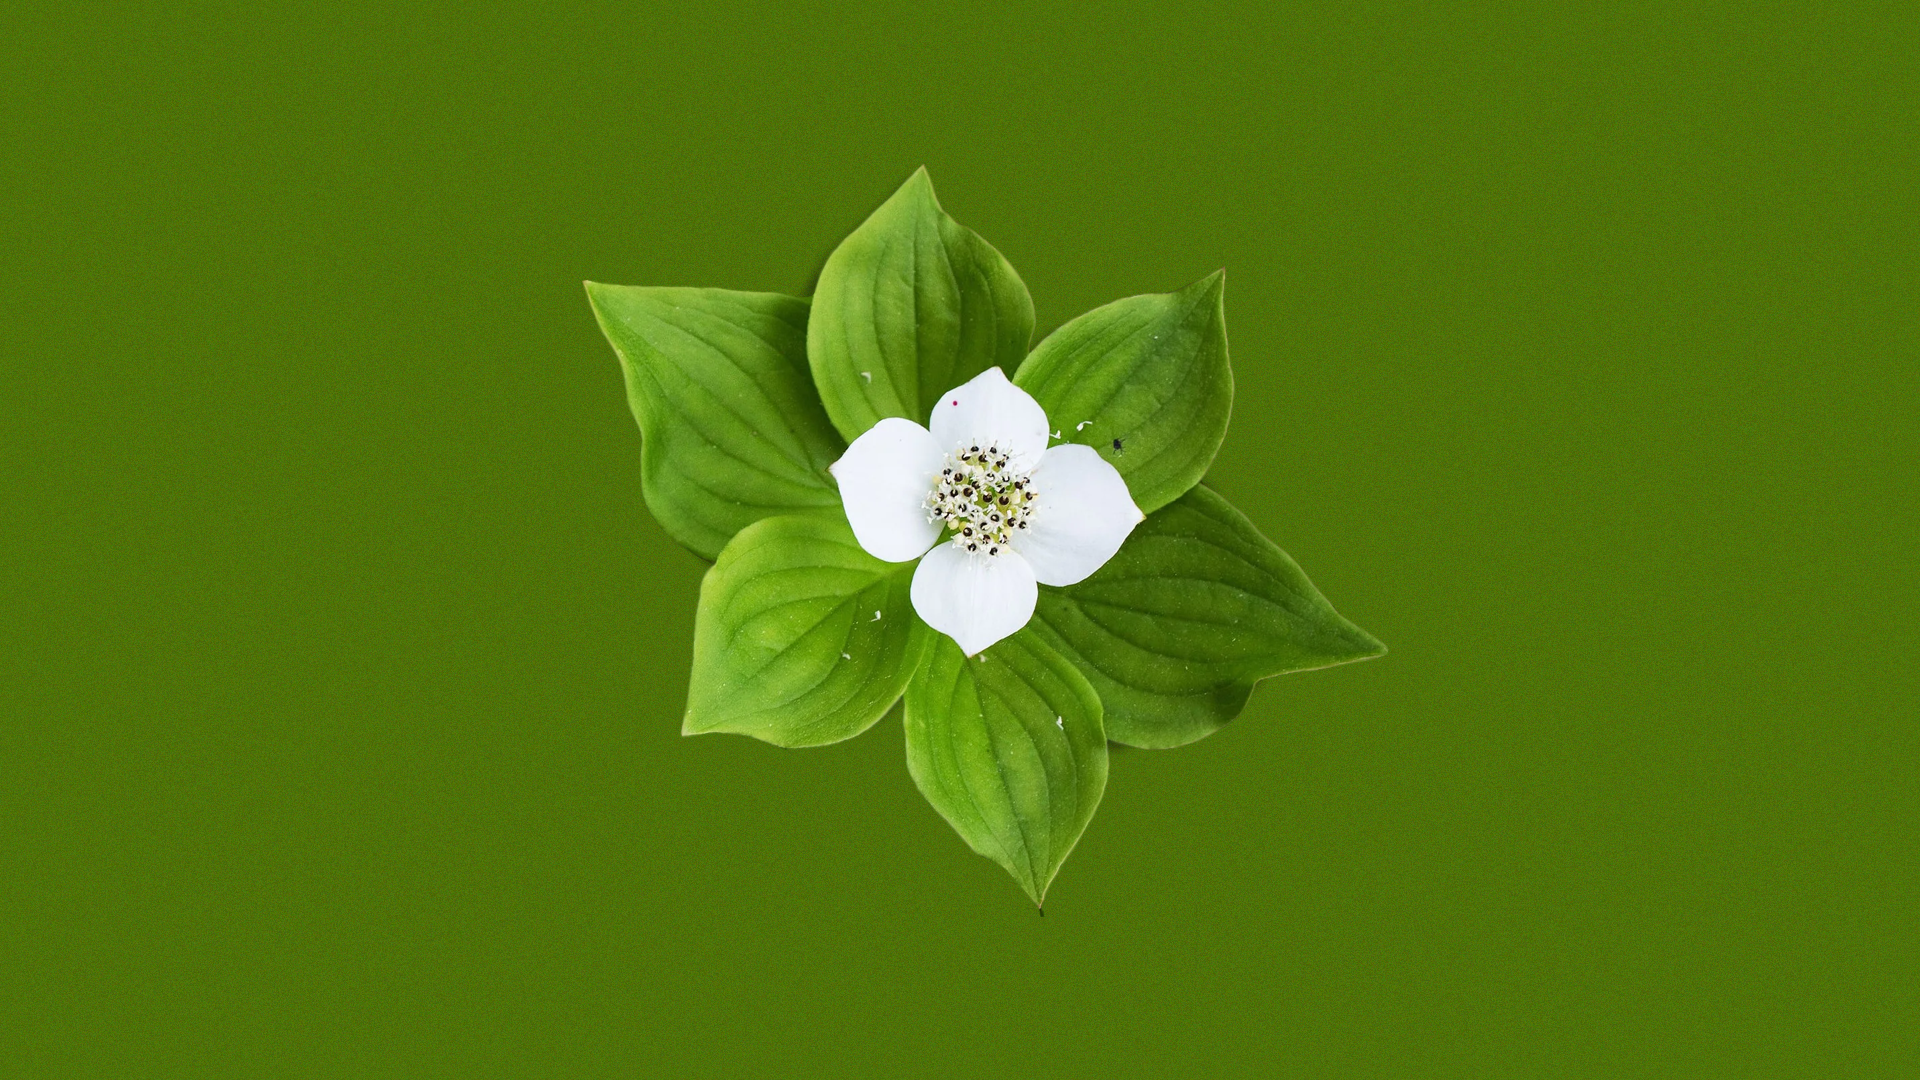 General 1920x1080 Buncheberry nature minimalism simple background green background flowers plants green